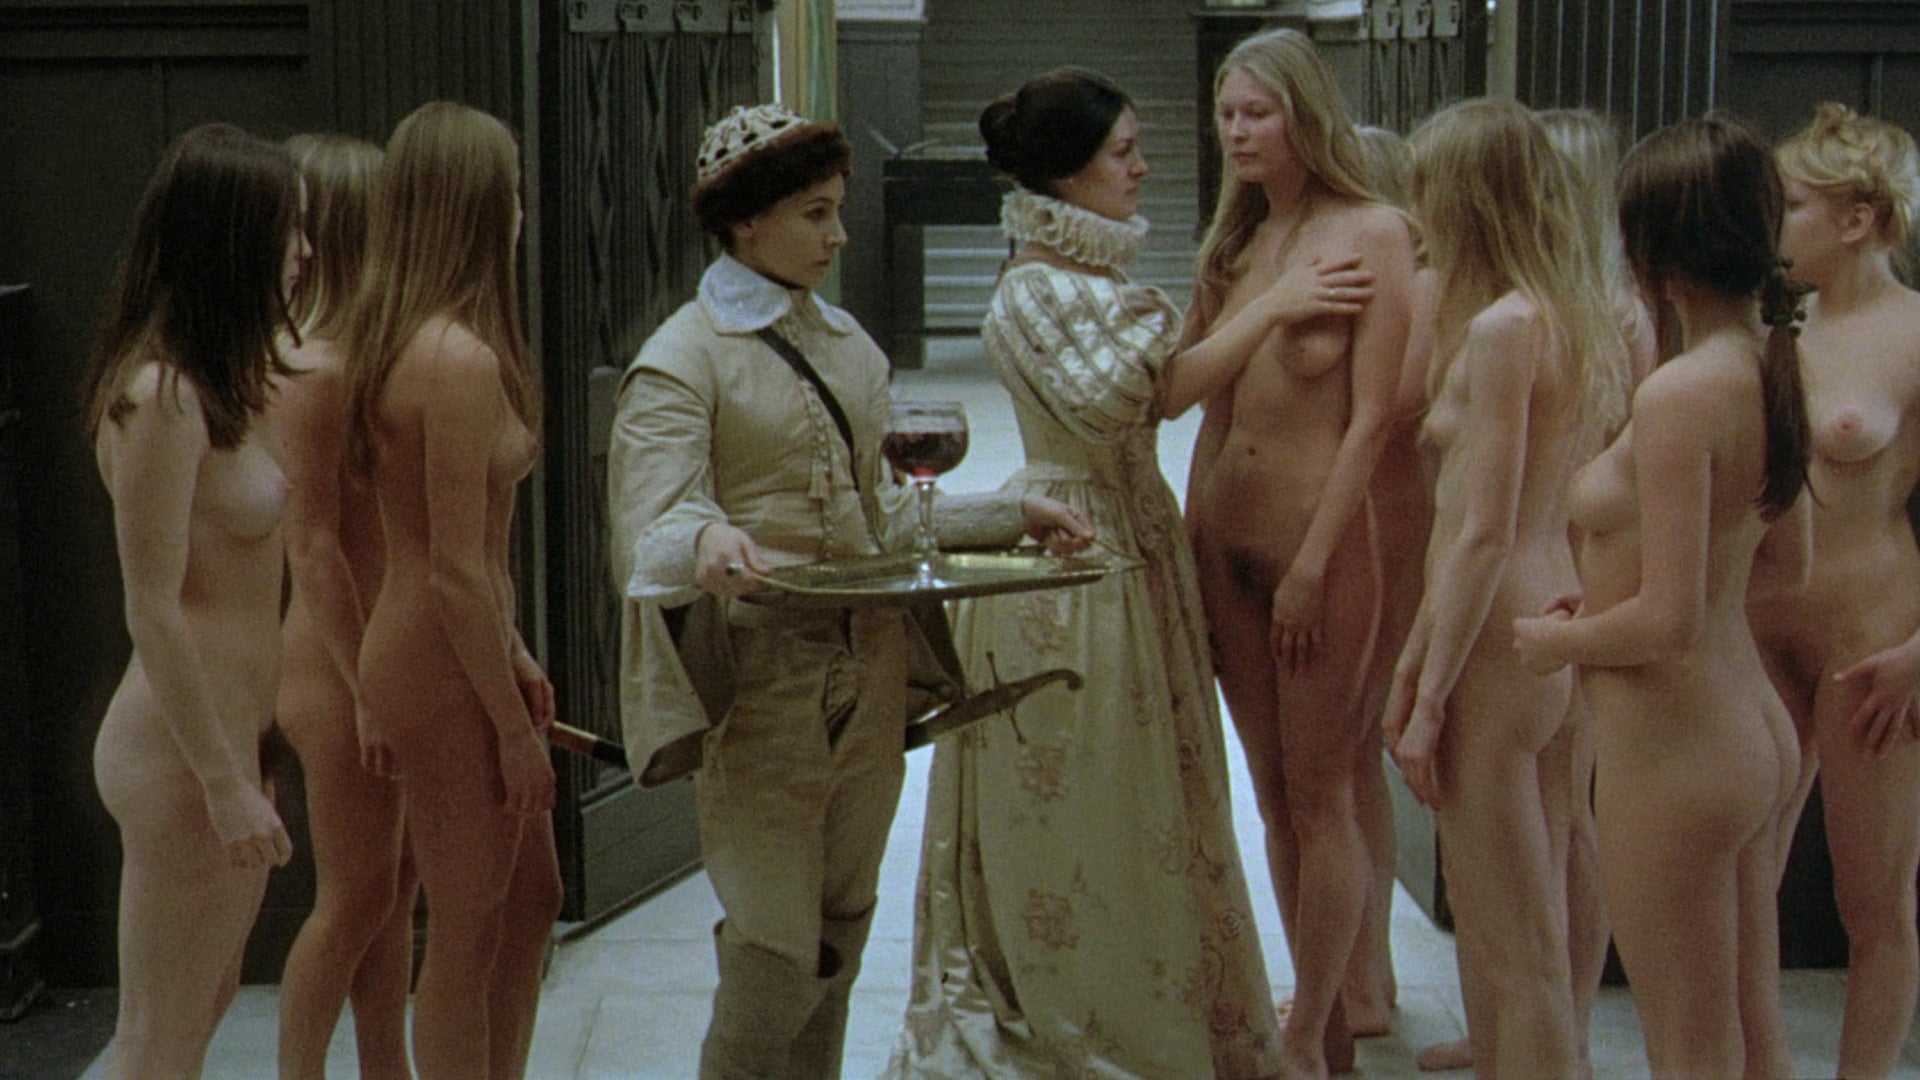 Countess Bathory (Paloma Picasso) examines the girls brought to her in the Erzbet Bathory episode of Immoral Tales (1974) 